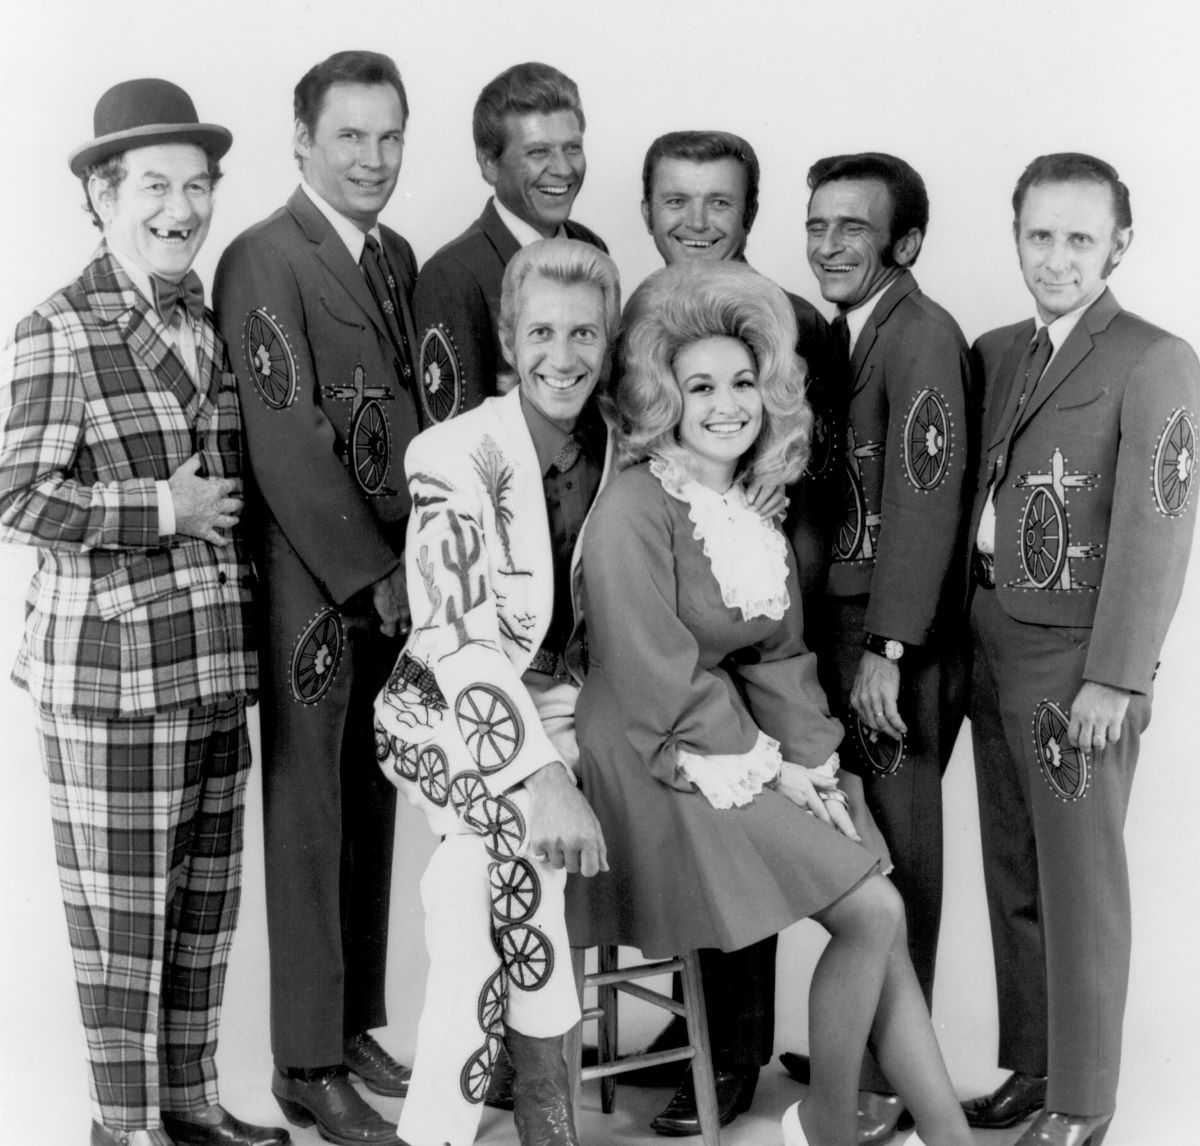 Porter Wagoner and Dolly Parton sit together in front of their backing band of 6 people. Five members of the band wear matching suits and one wears a checkered suit and hat.